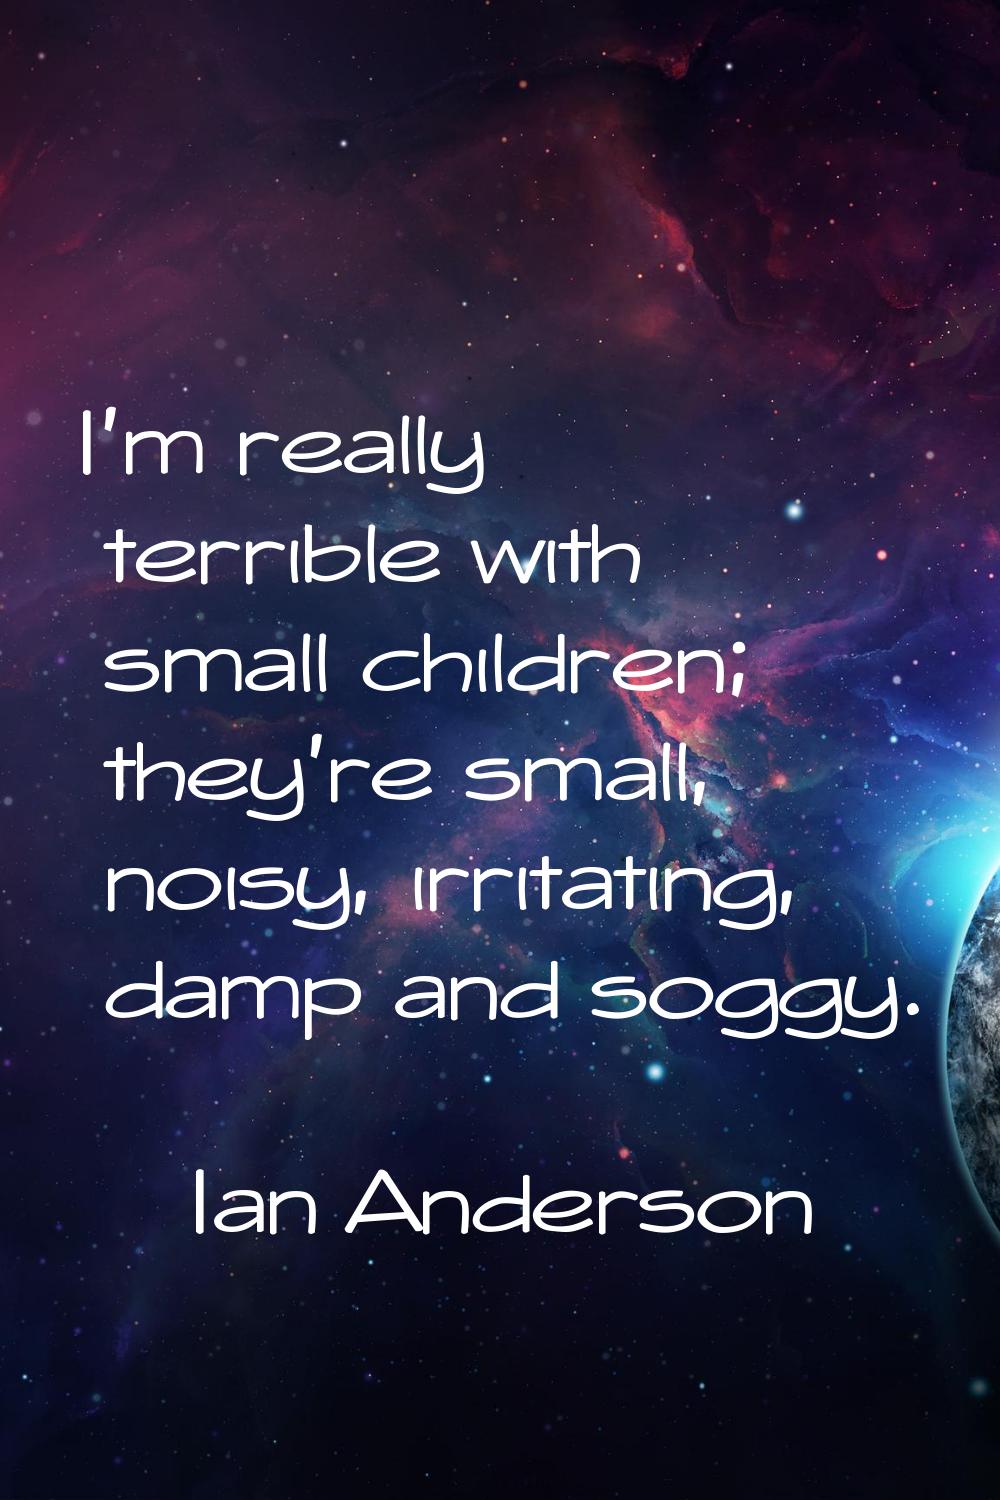 I'm really terrible with small children; they're small, noisy, irritating, damp and soggy.